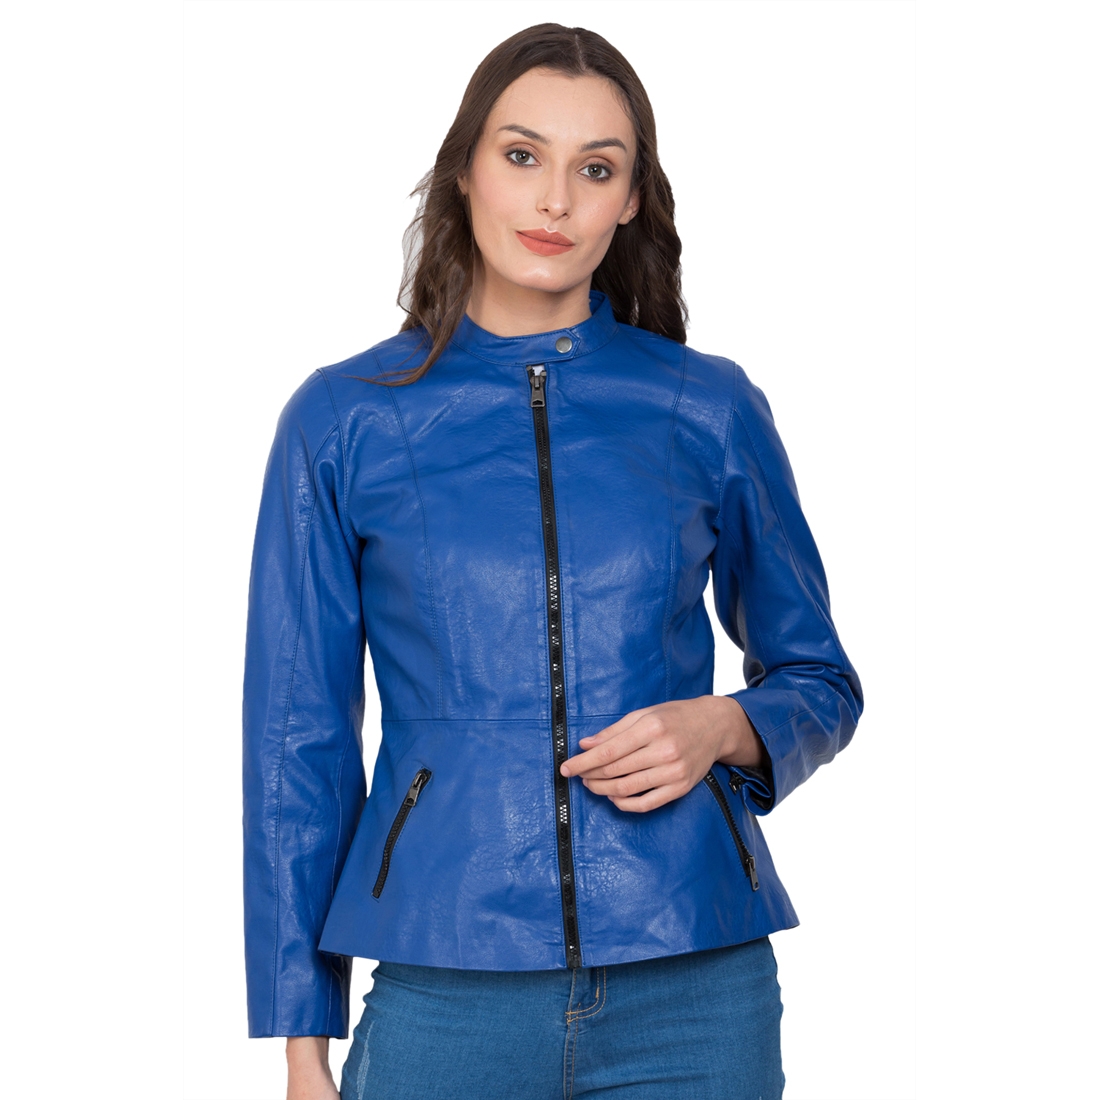 Justanned | JUSTANNED COBALT WOMEN LEATHER JACKET